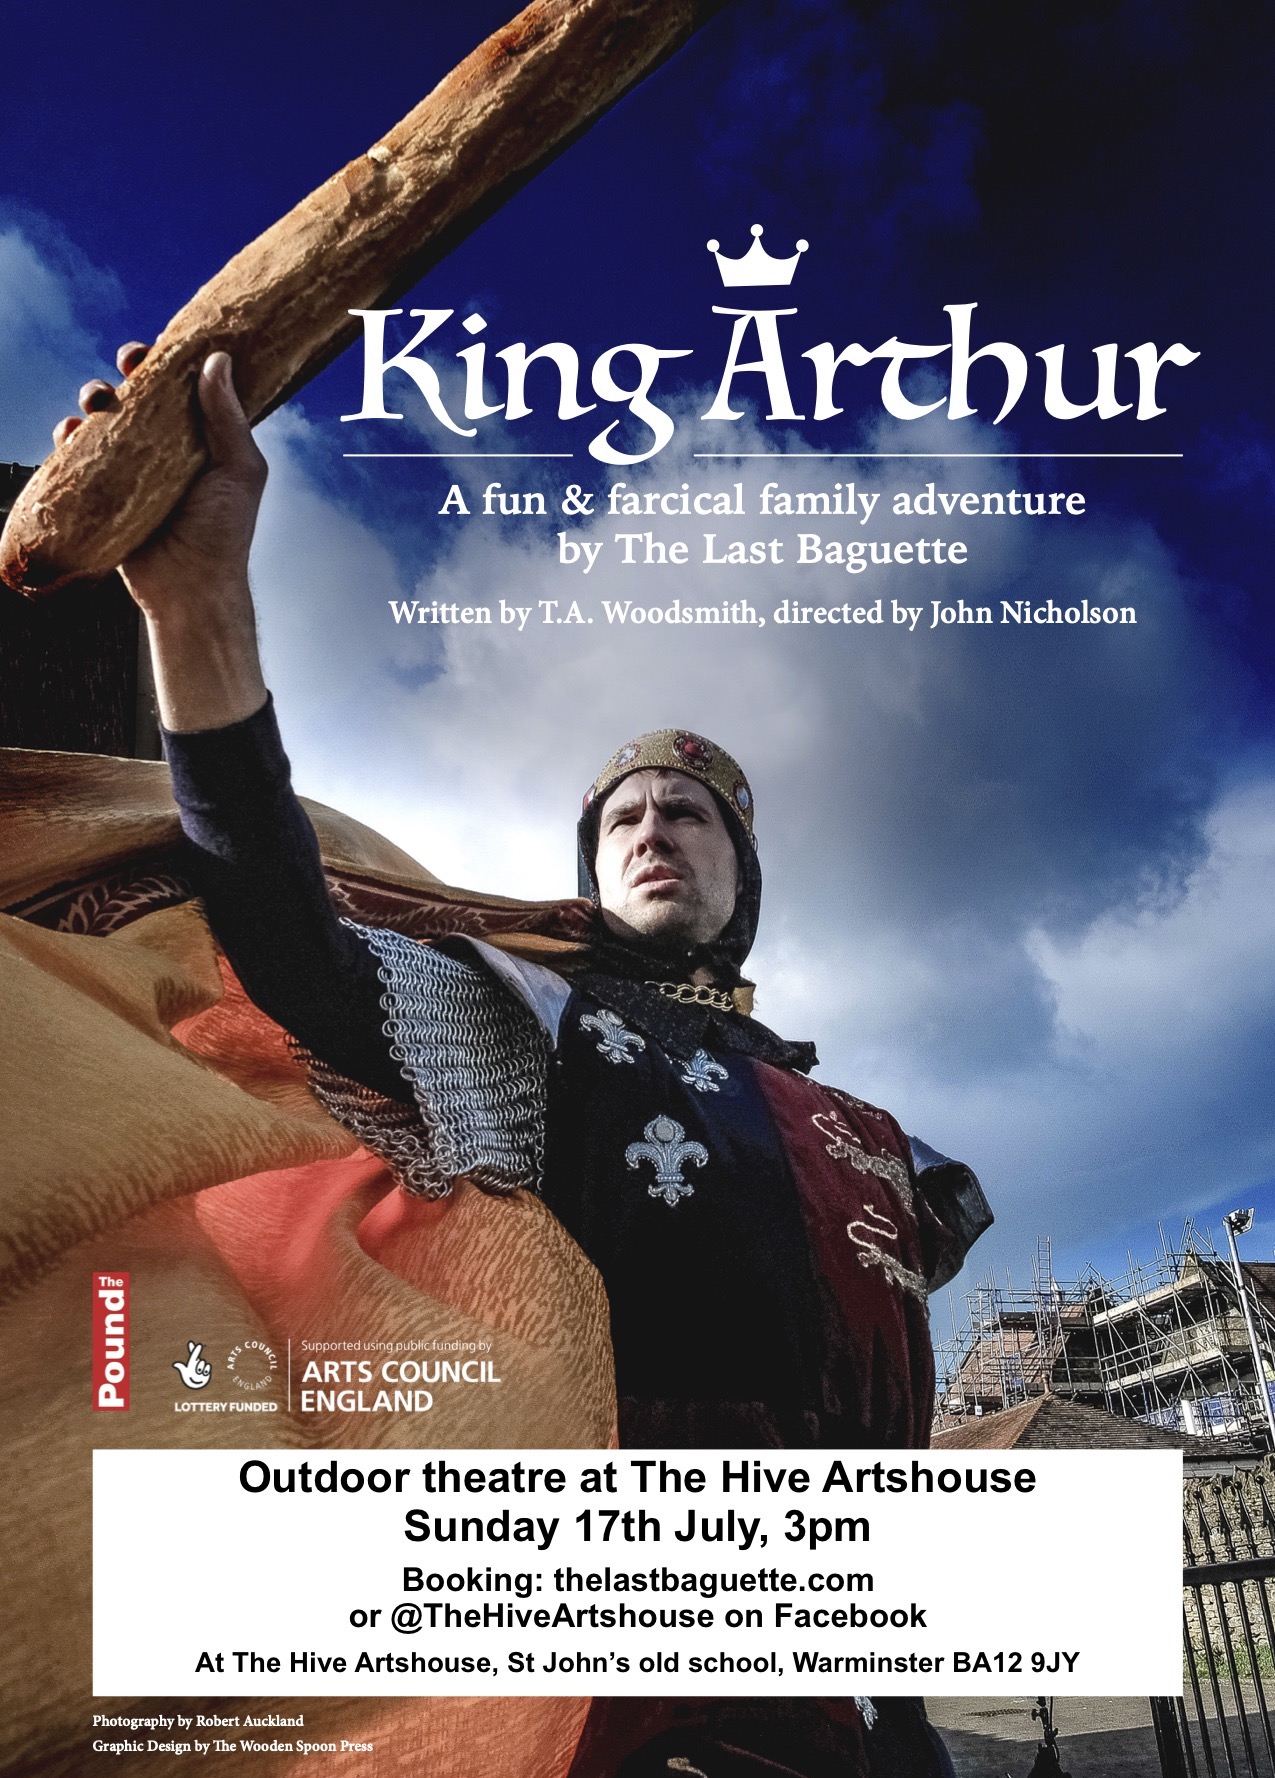 King Arthur - a fun and farcical family adventure by The Last Baguette